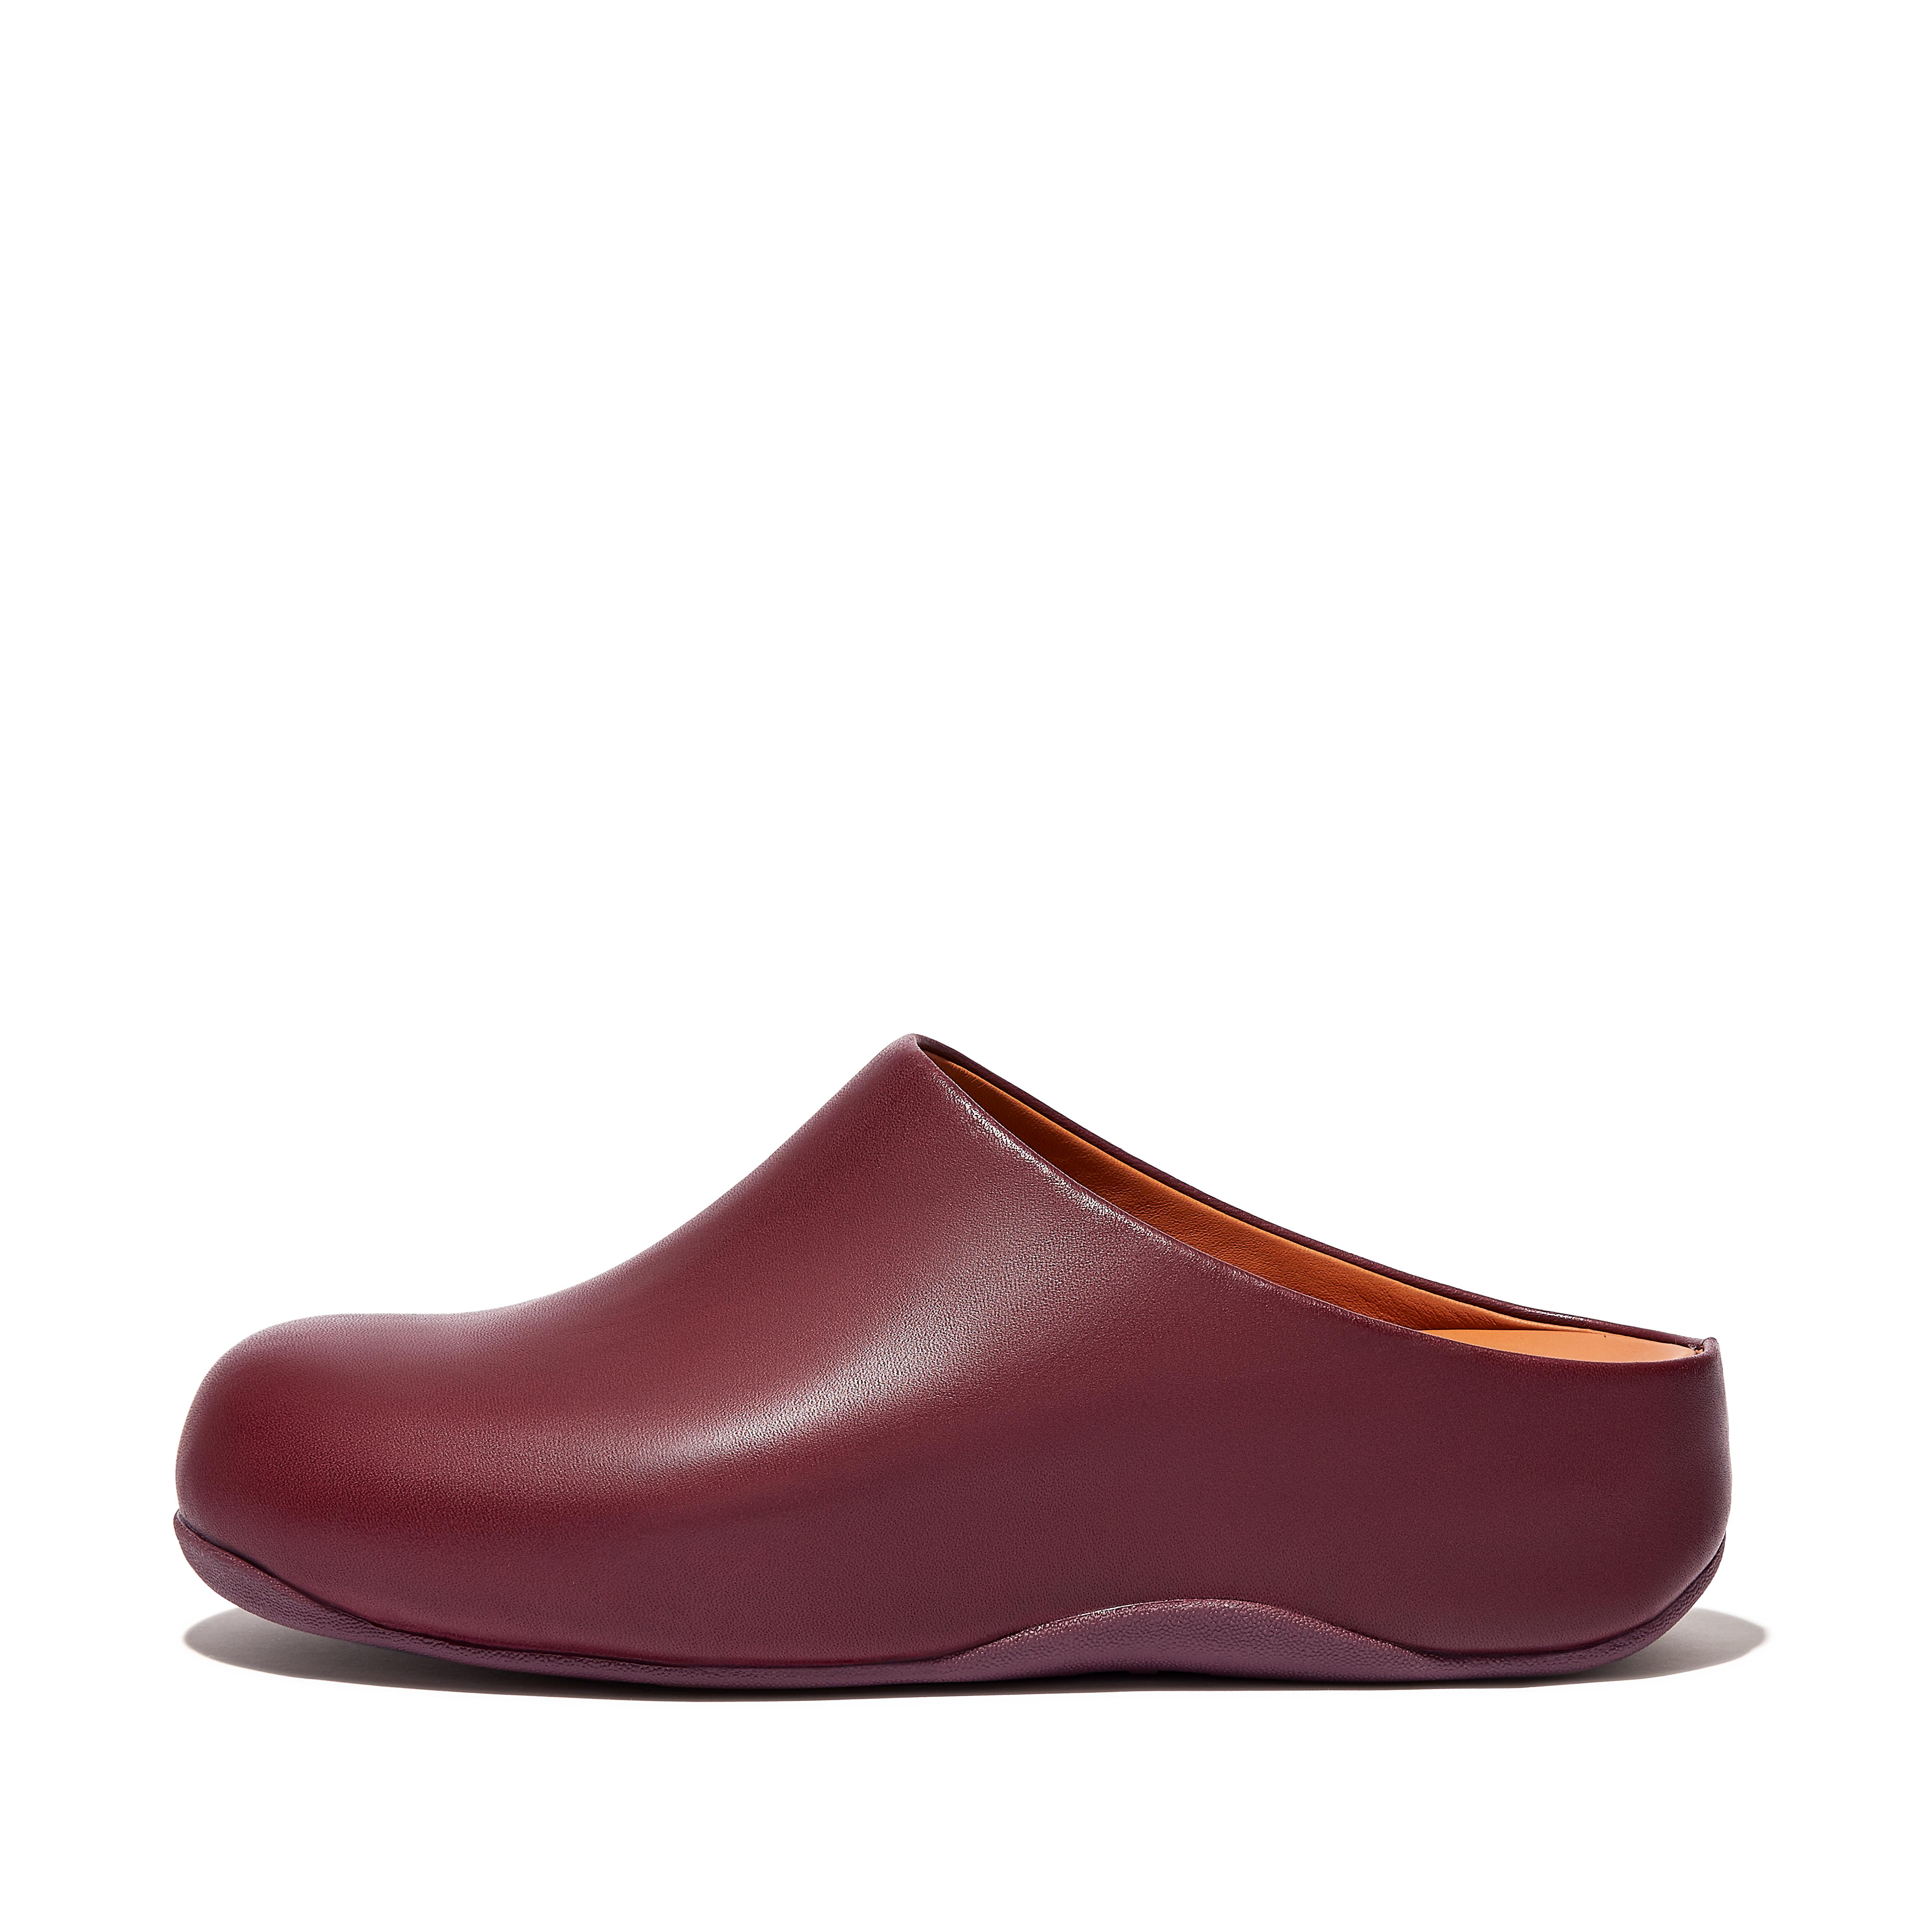 Fitflop Leather Clogs